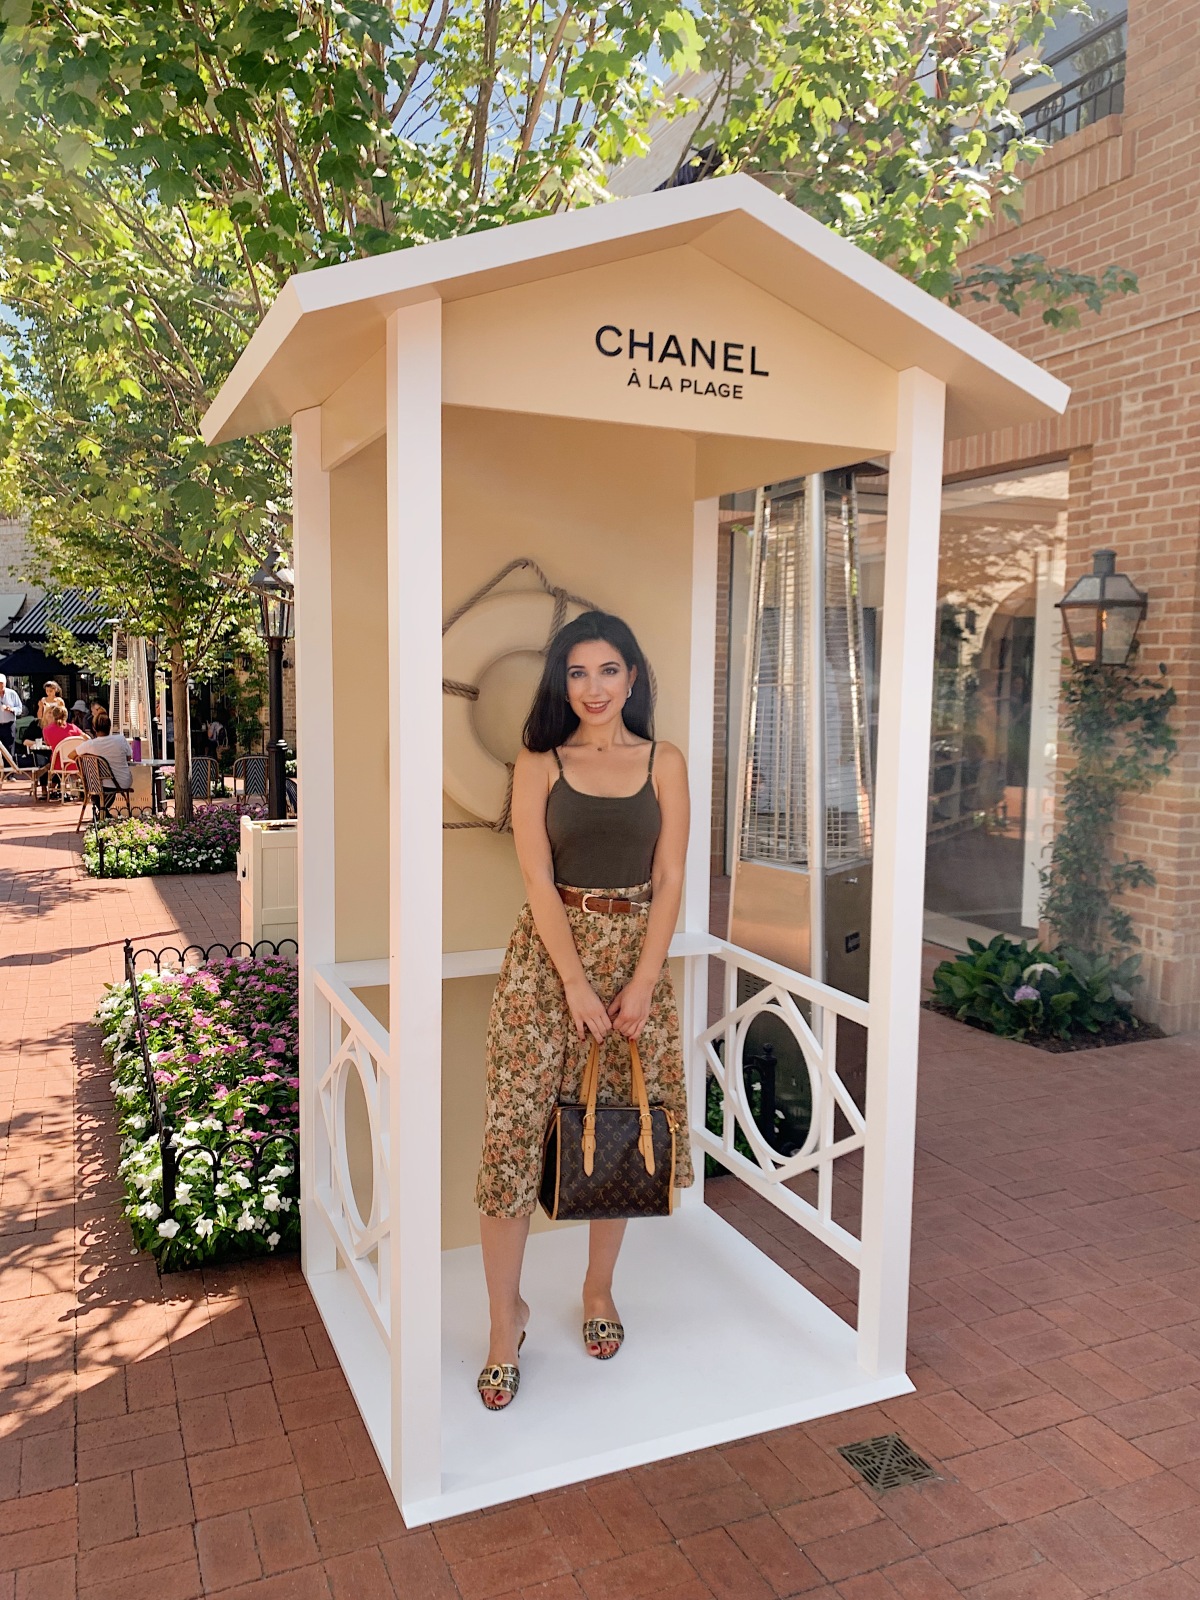 Chanel Beauty, Chanel perfume, Chance by Chanel, Palisades Village, Pacific Palisades shopping, beauty event, LA events, style blogger, beauty blogger, lifestyle blogger, lookbook, ootd, Chanel, vintage, luxury, self care, Chanel A La Plage